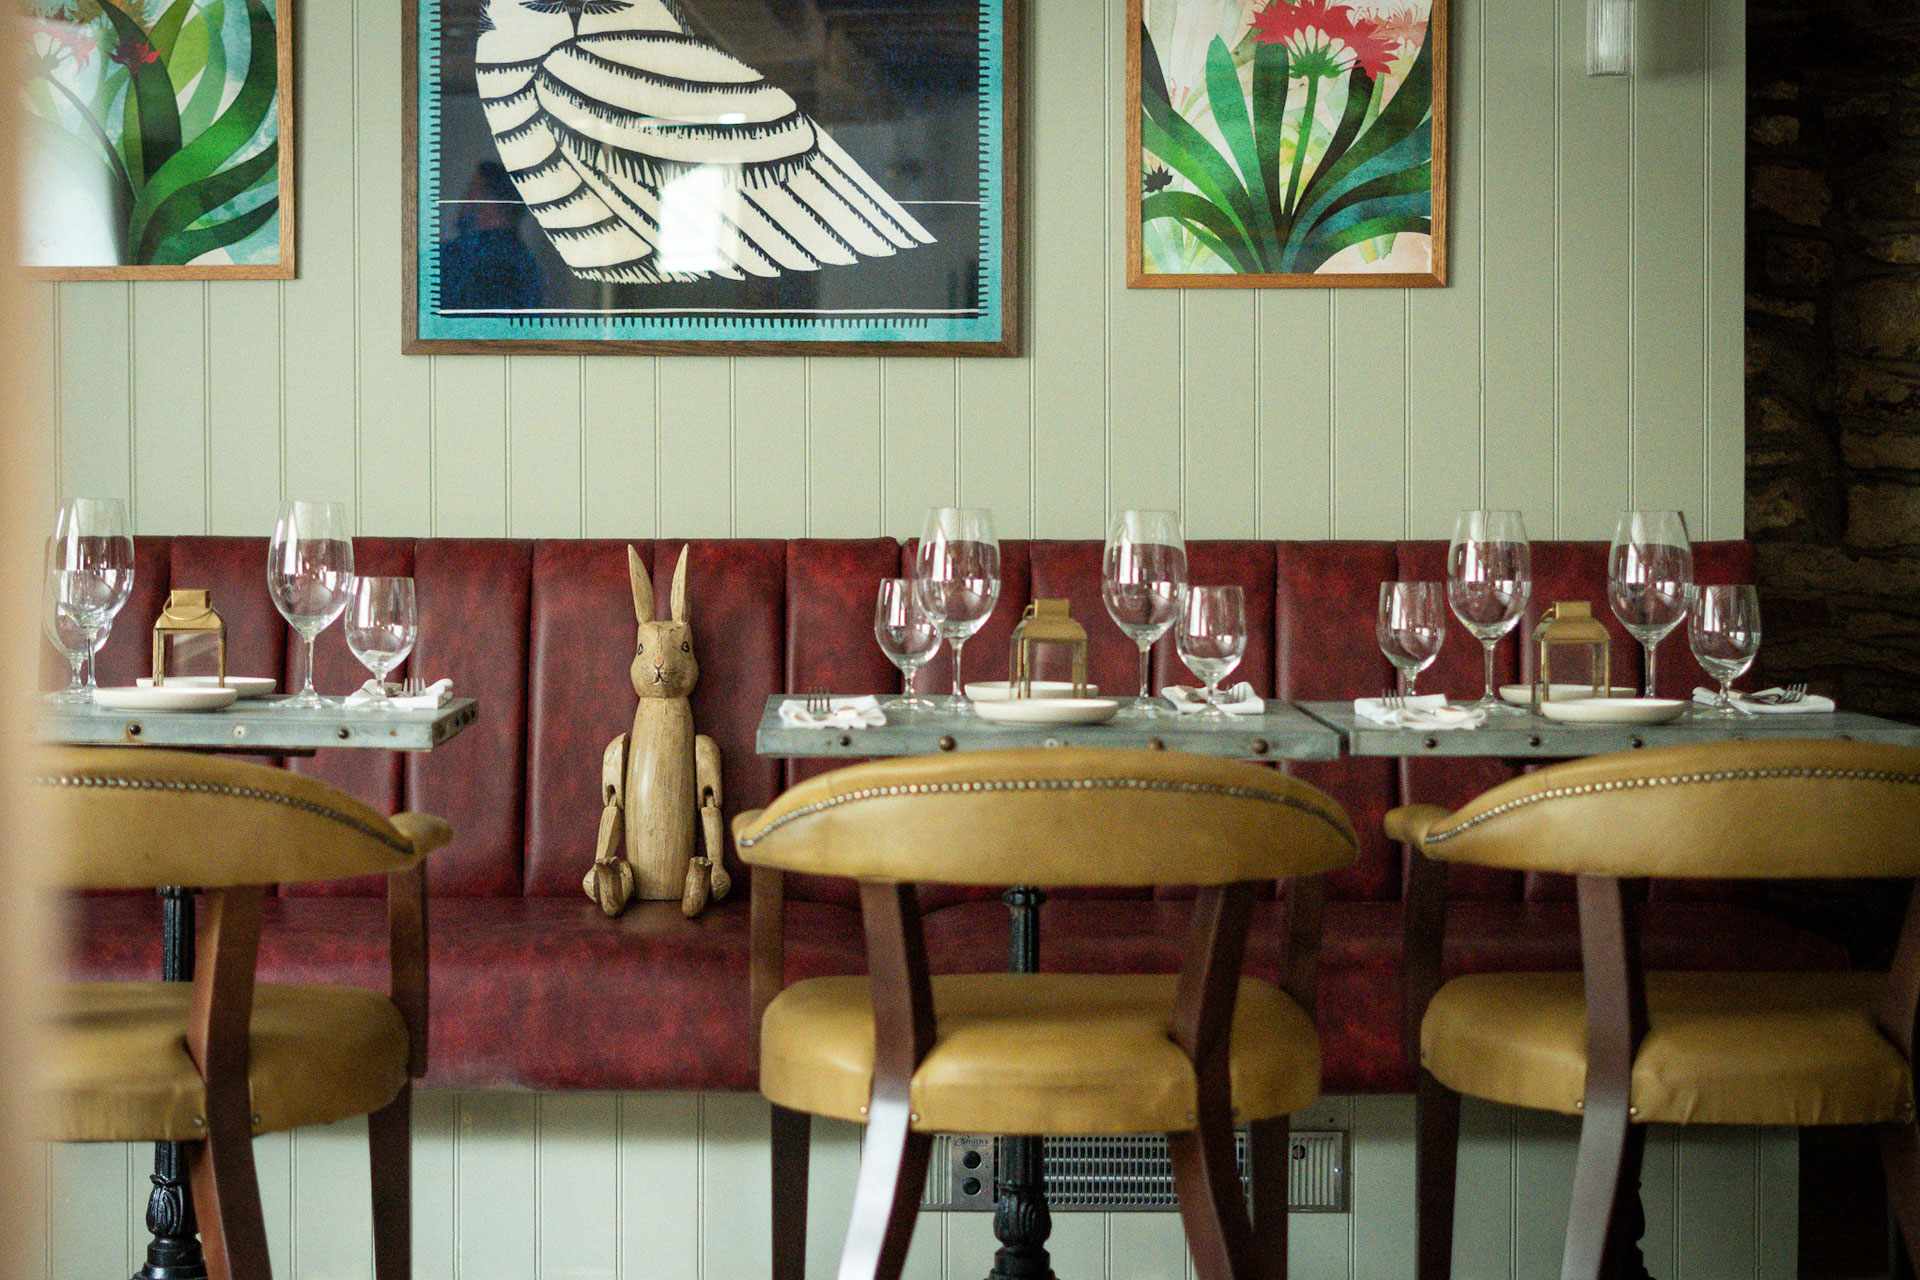 Gastropub dining room with red banquette seating and wooden chairs.